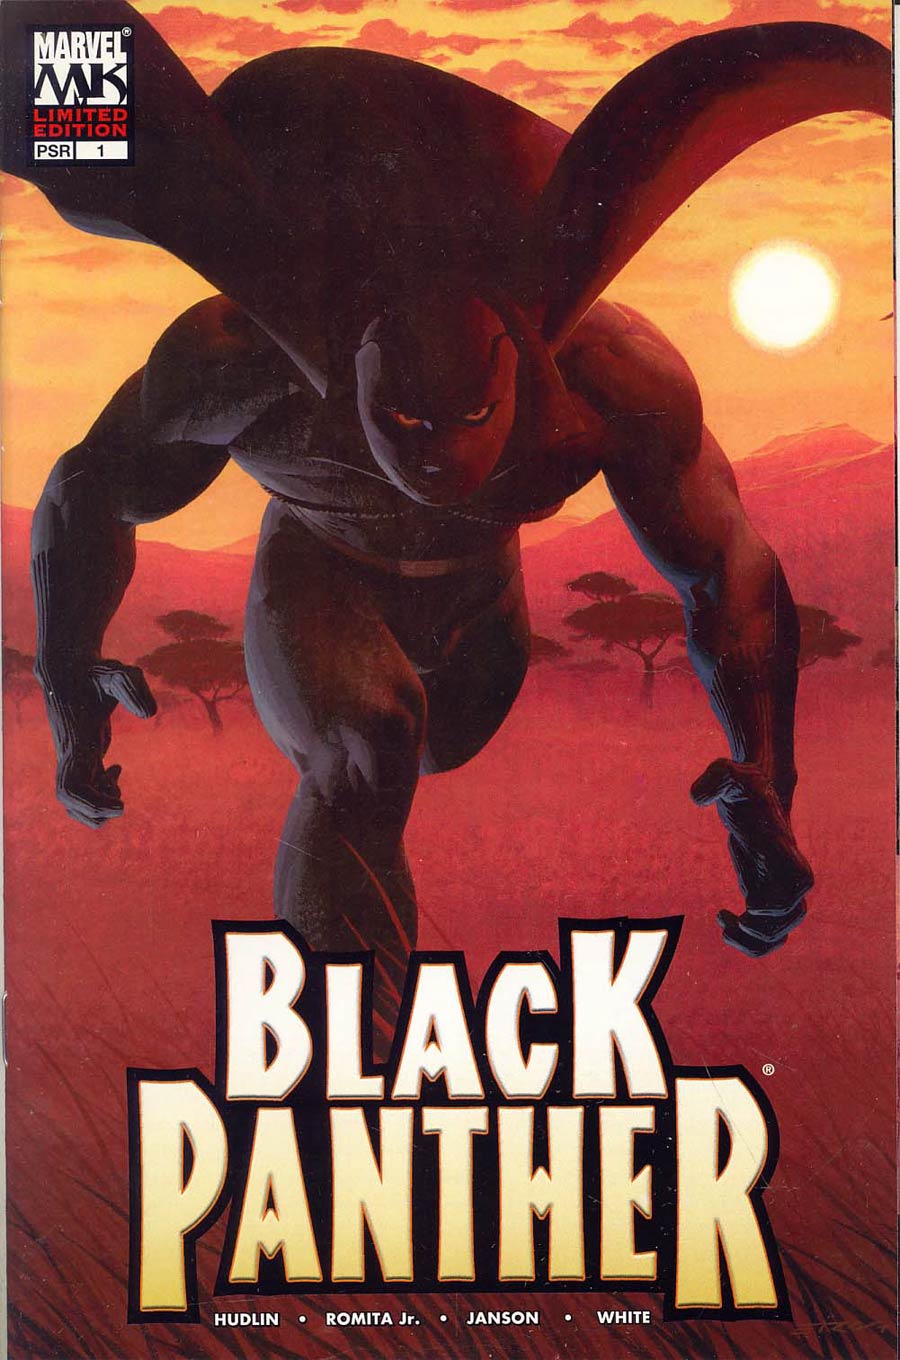 Black Panther Vol 4 #1 Cover C John Romita Jr Limited Edition Variant Cover